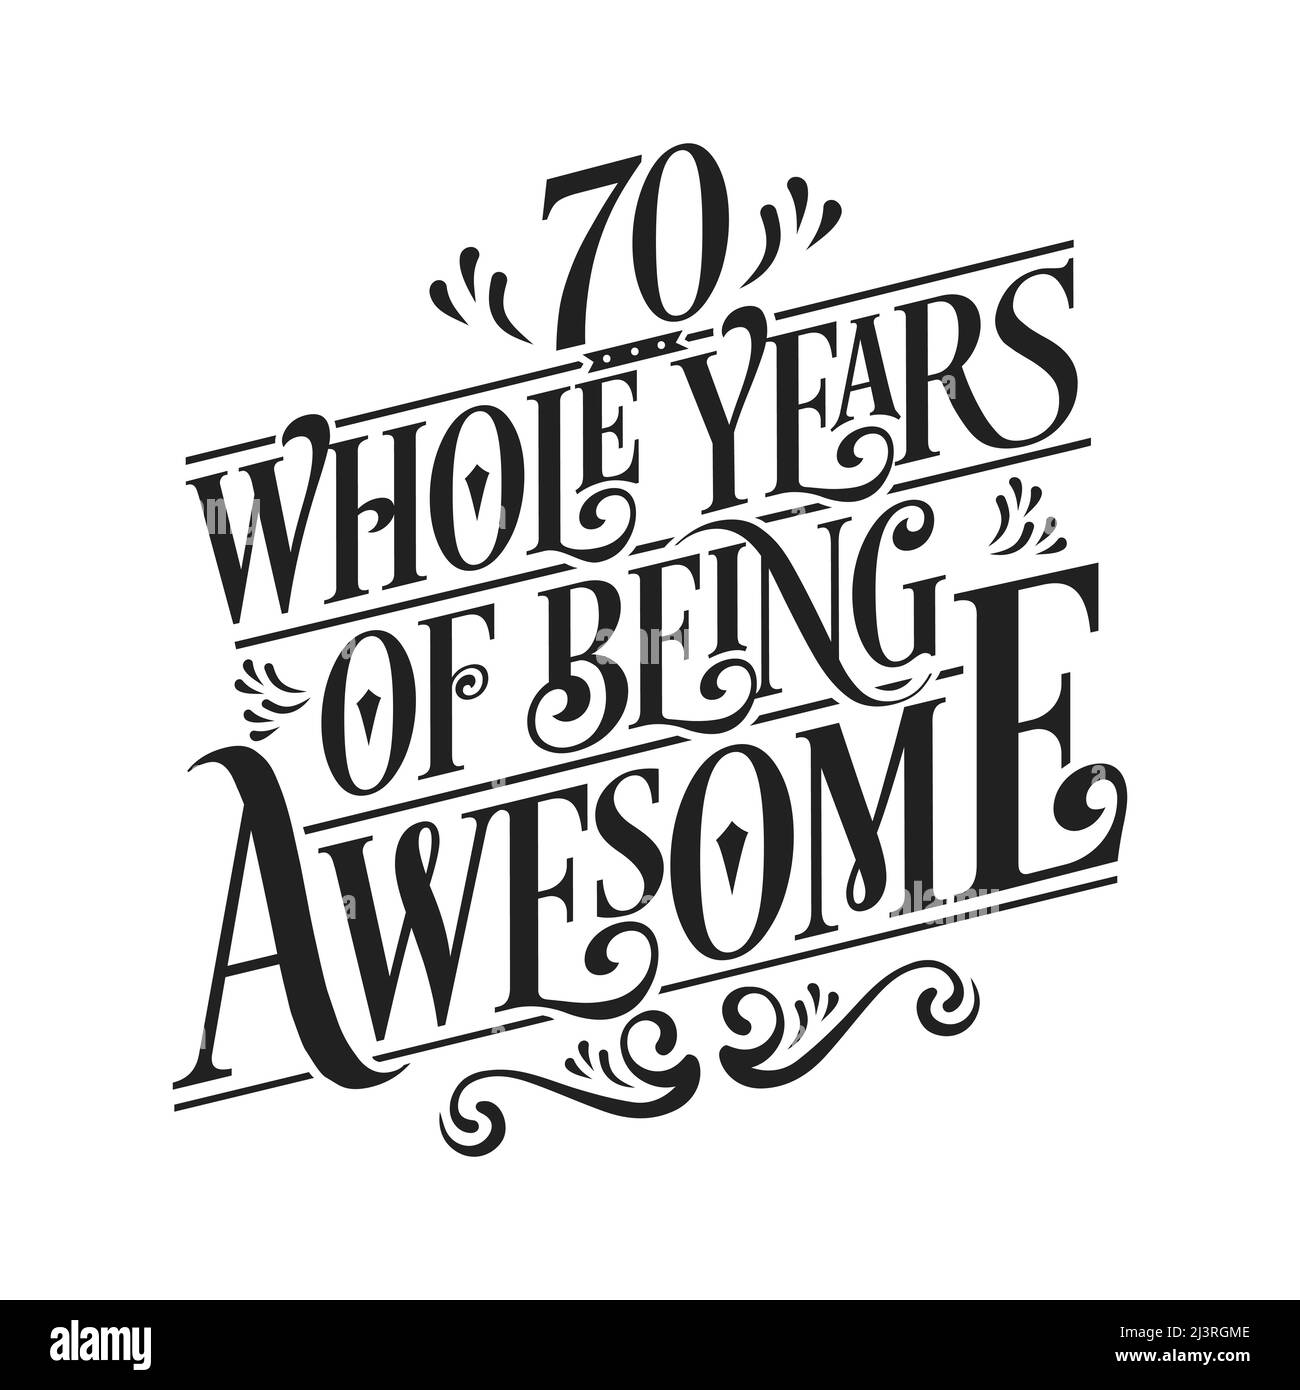 70 whole years of being awesome. 70th birthday celebration lettering Stock Vector